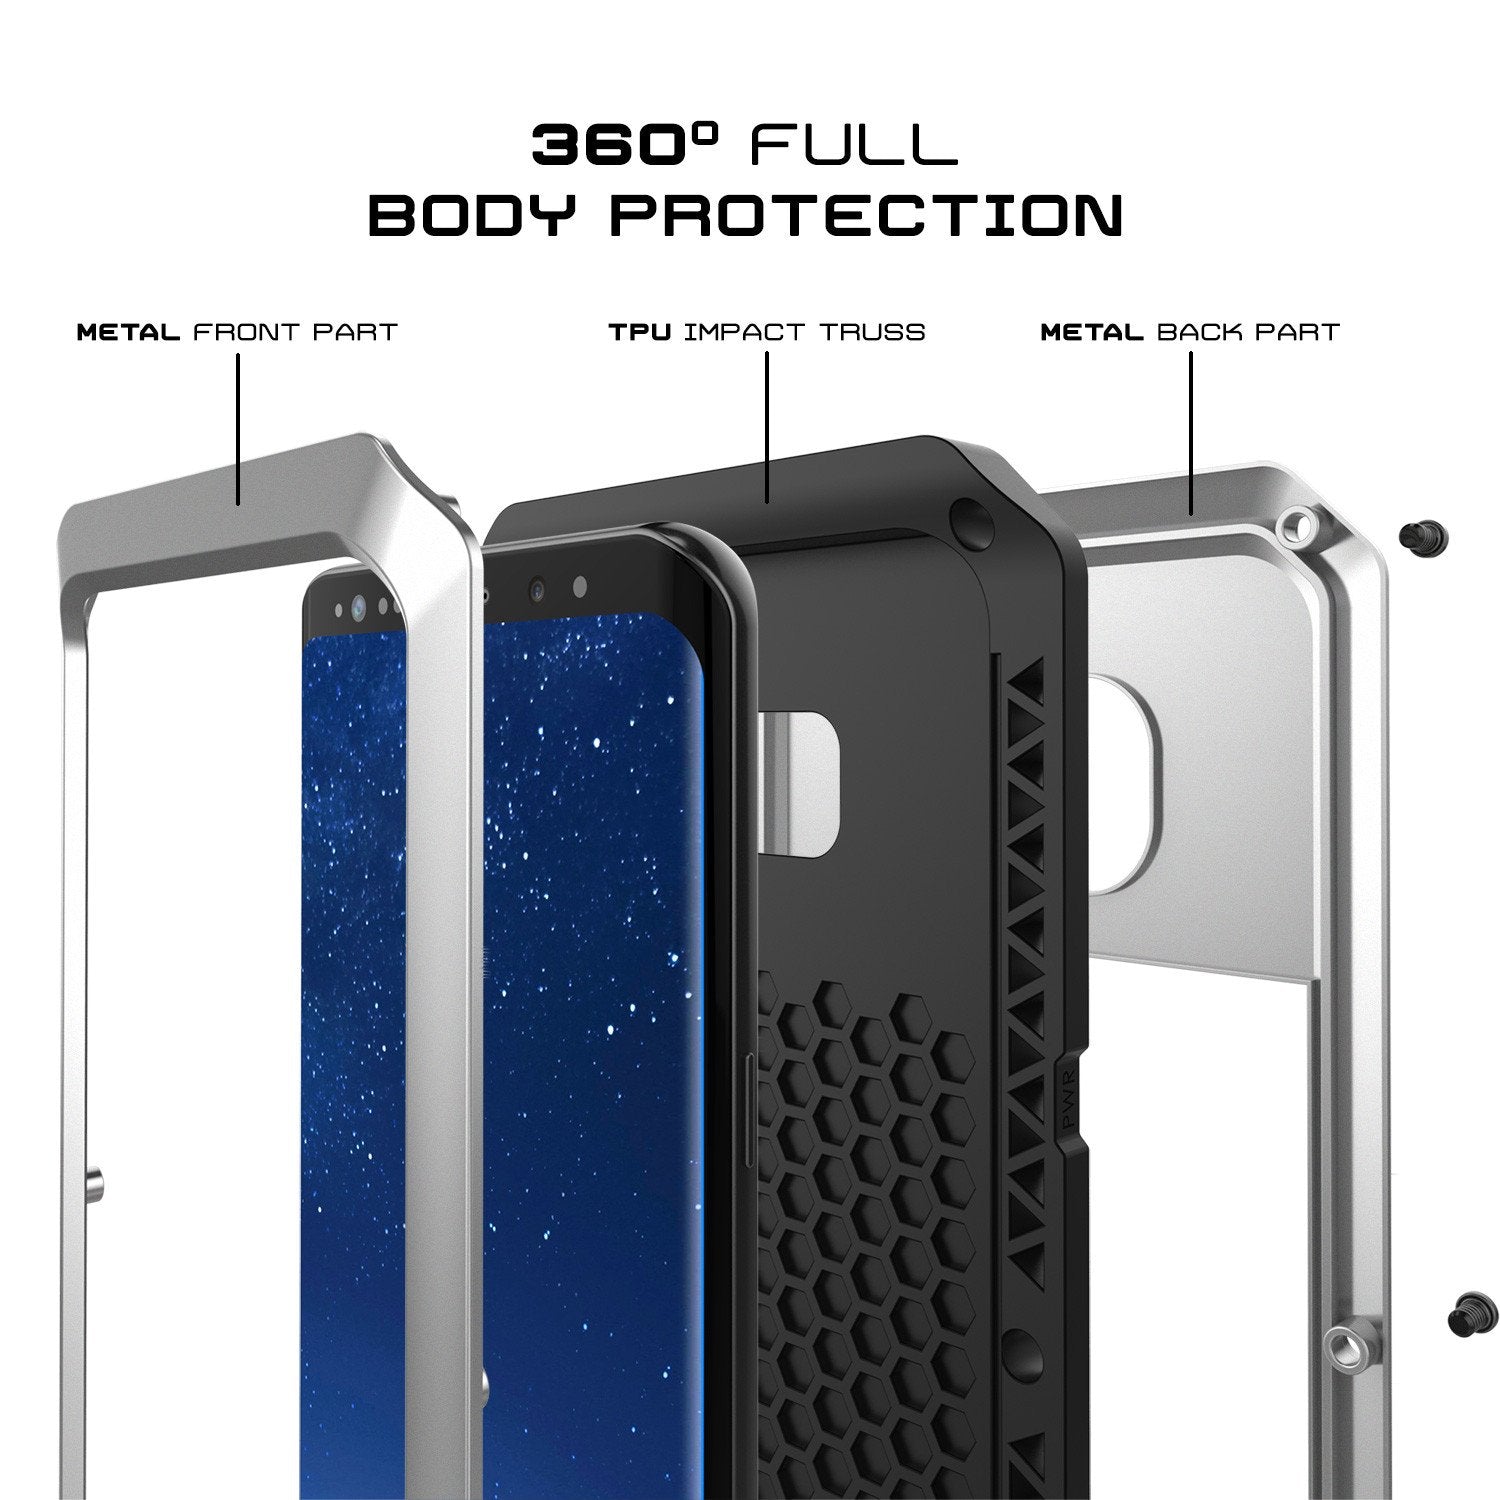 Galaxy S8 Full Body Shock Drop Protection Metal Case [SILVER]